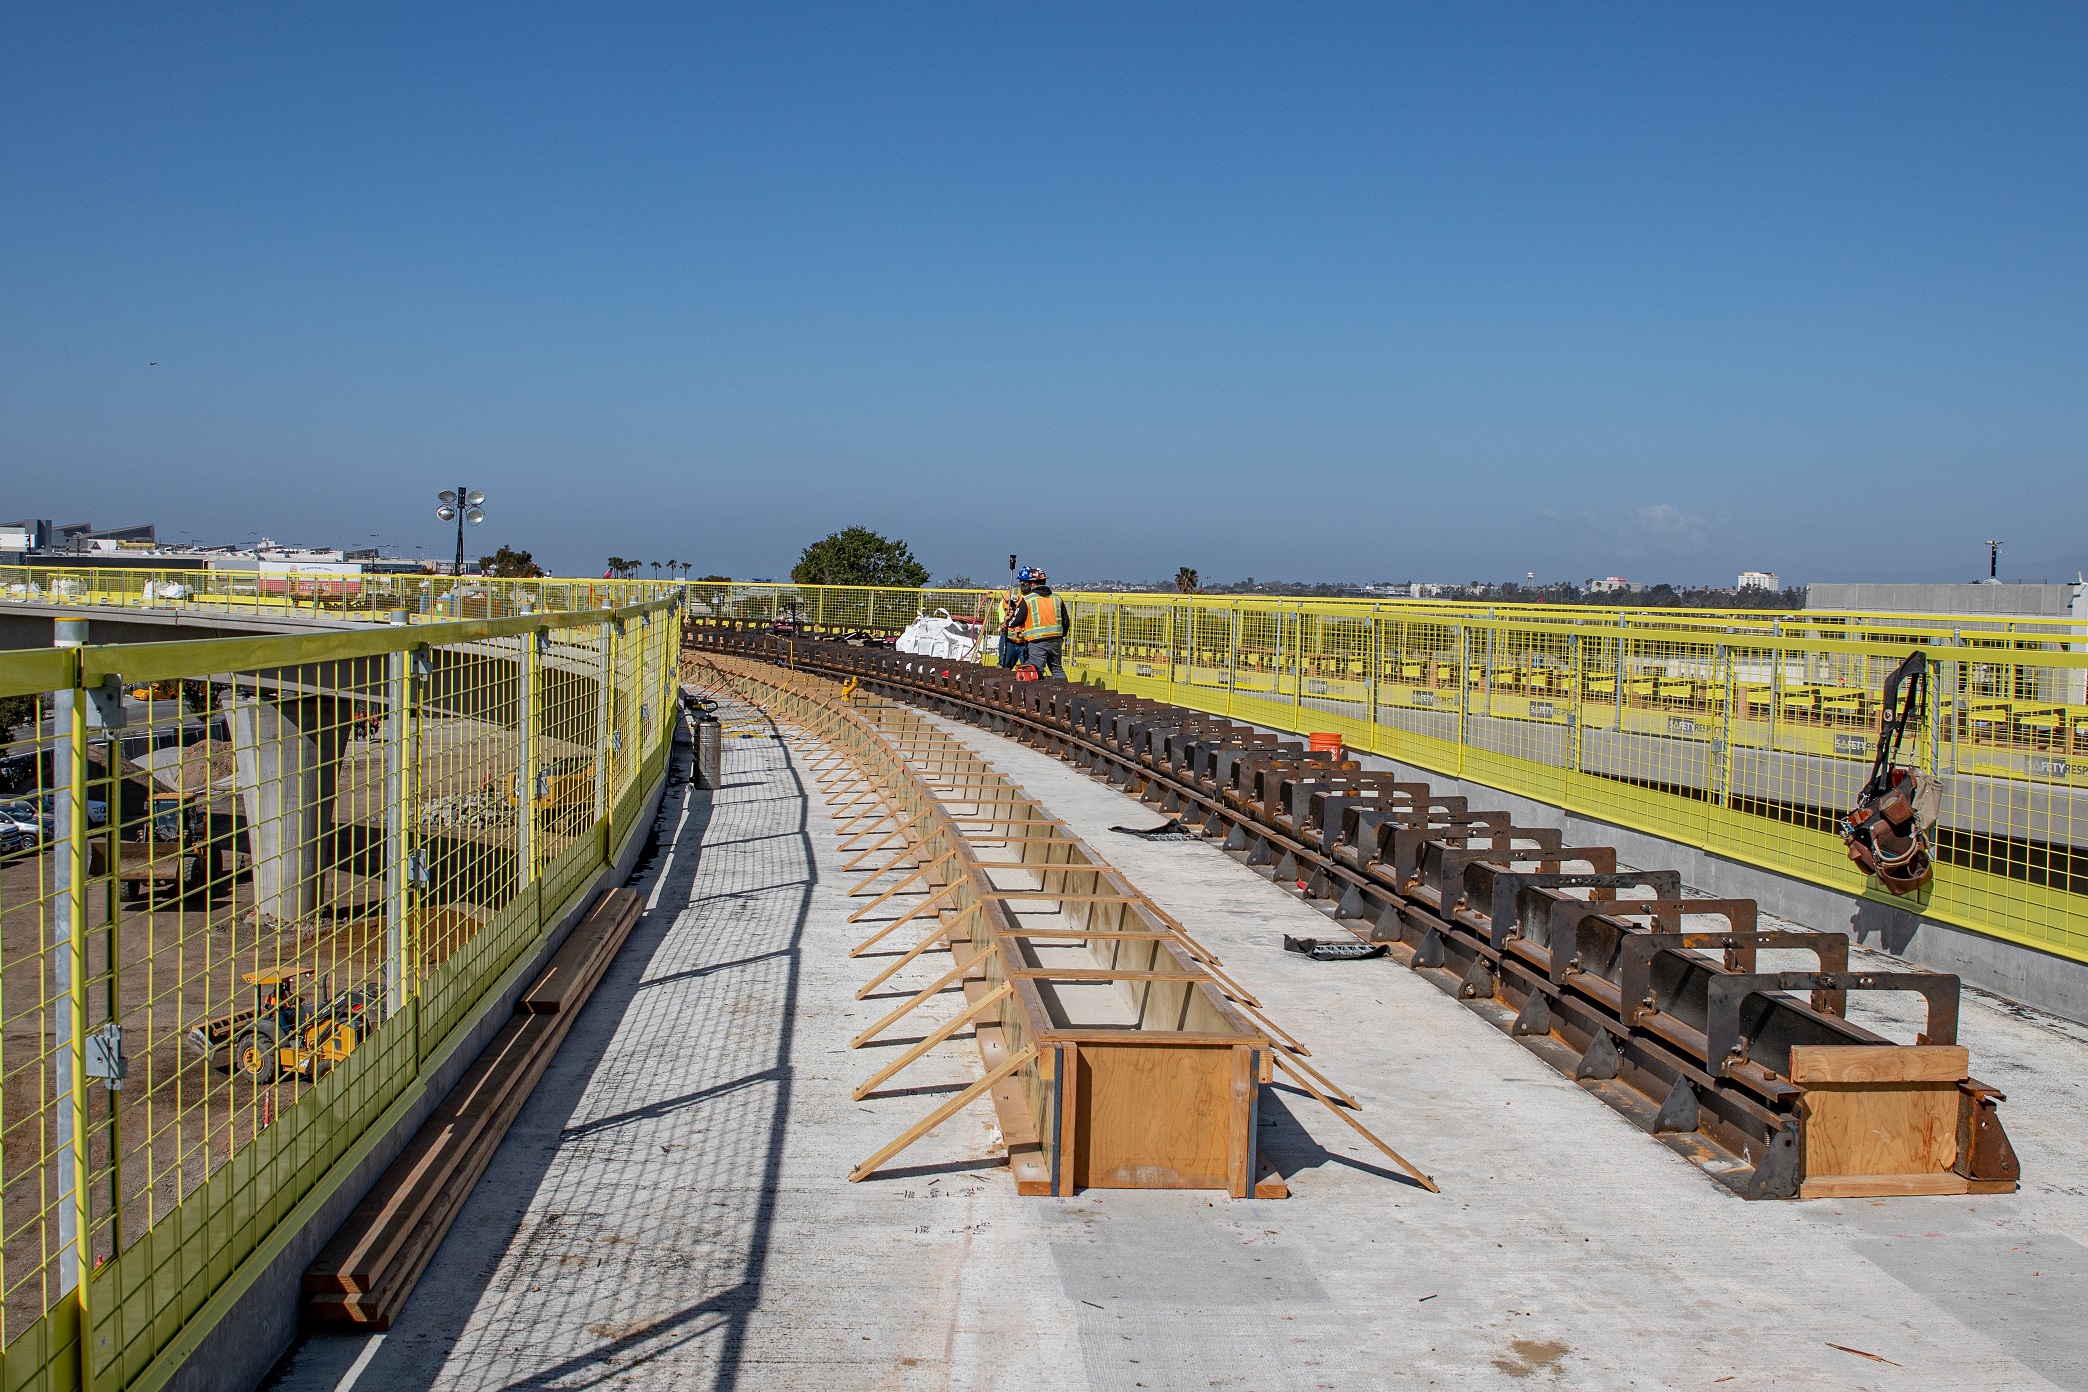 Following the completion of work constructing the guideway superstructure, work can begin on the Automated People Mover system's concrete tracks.